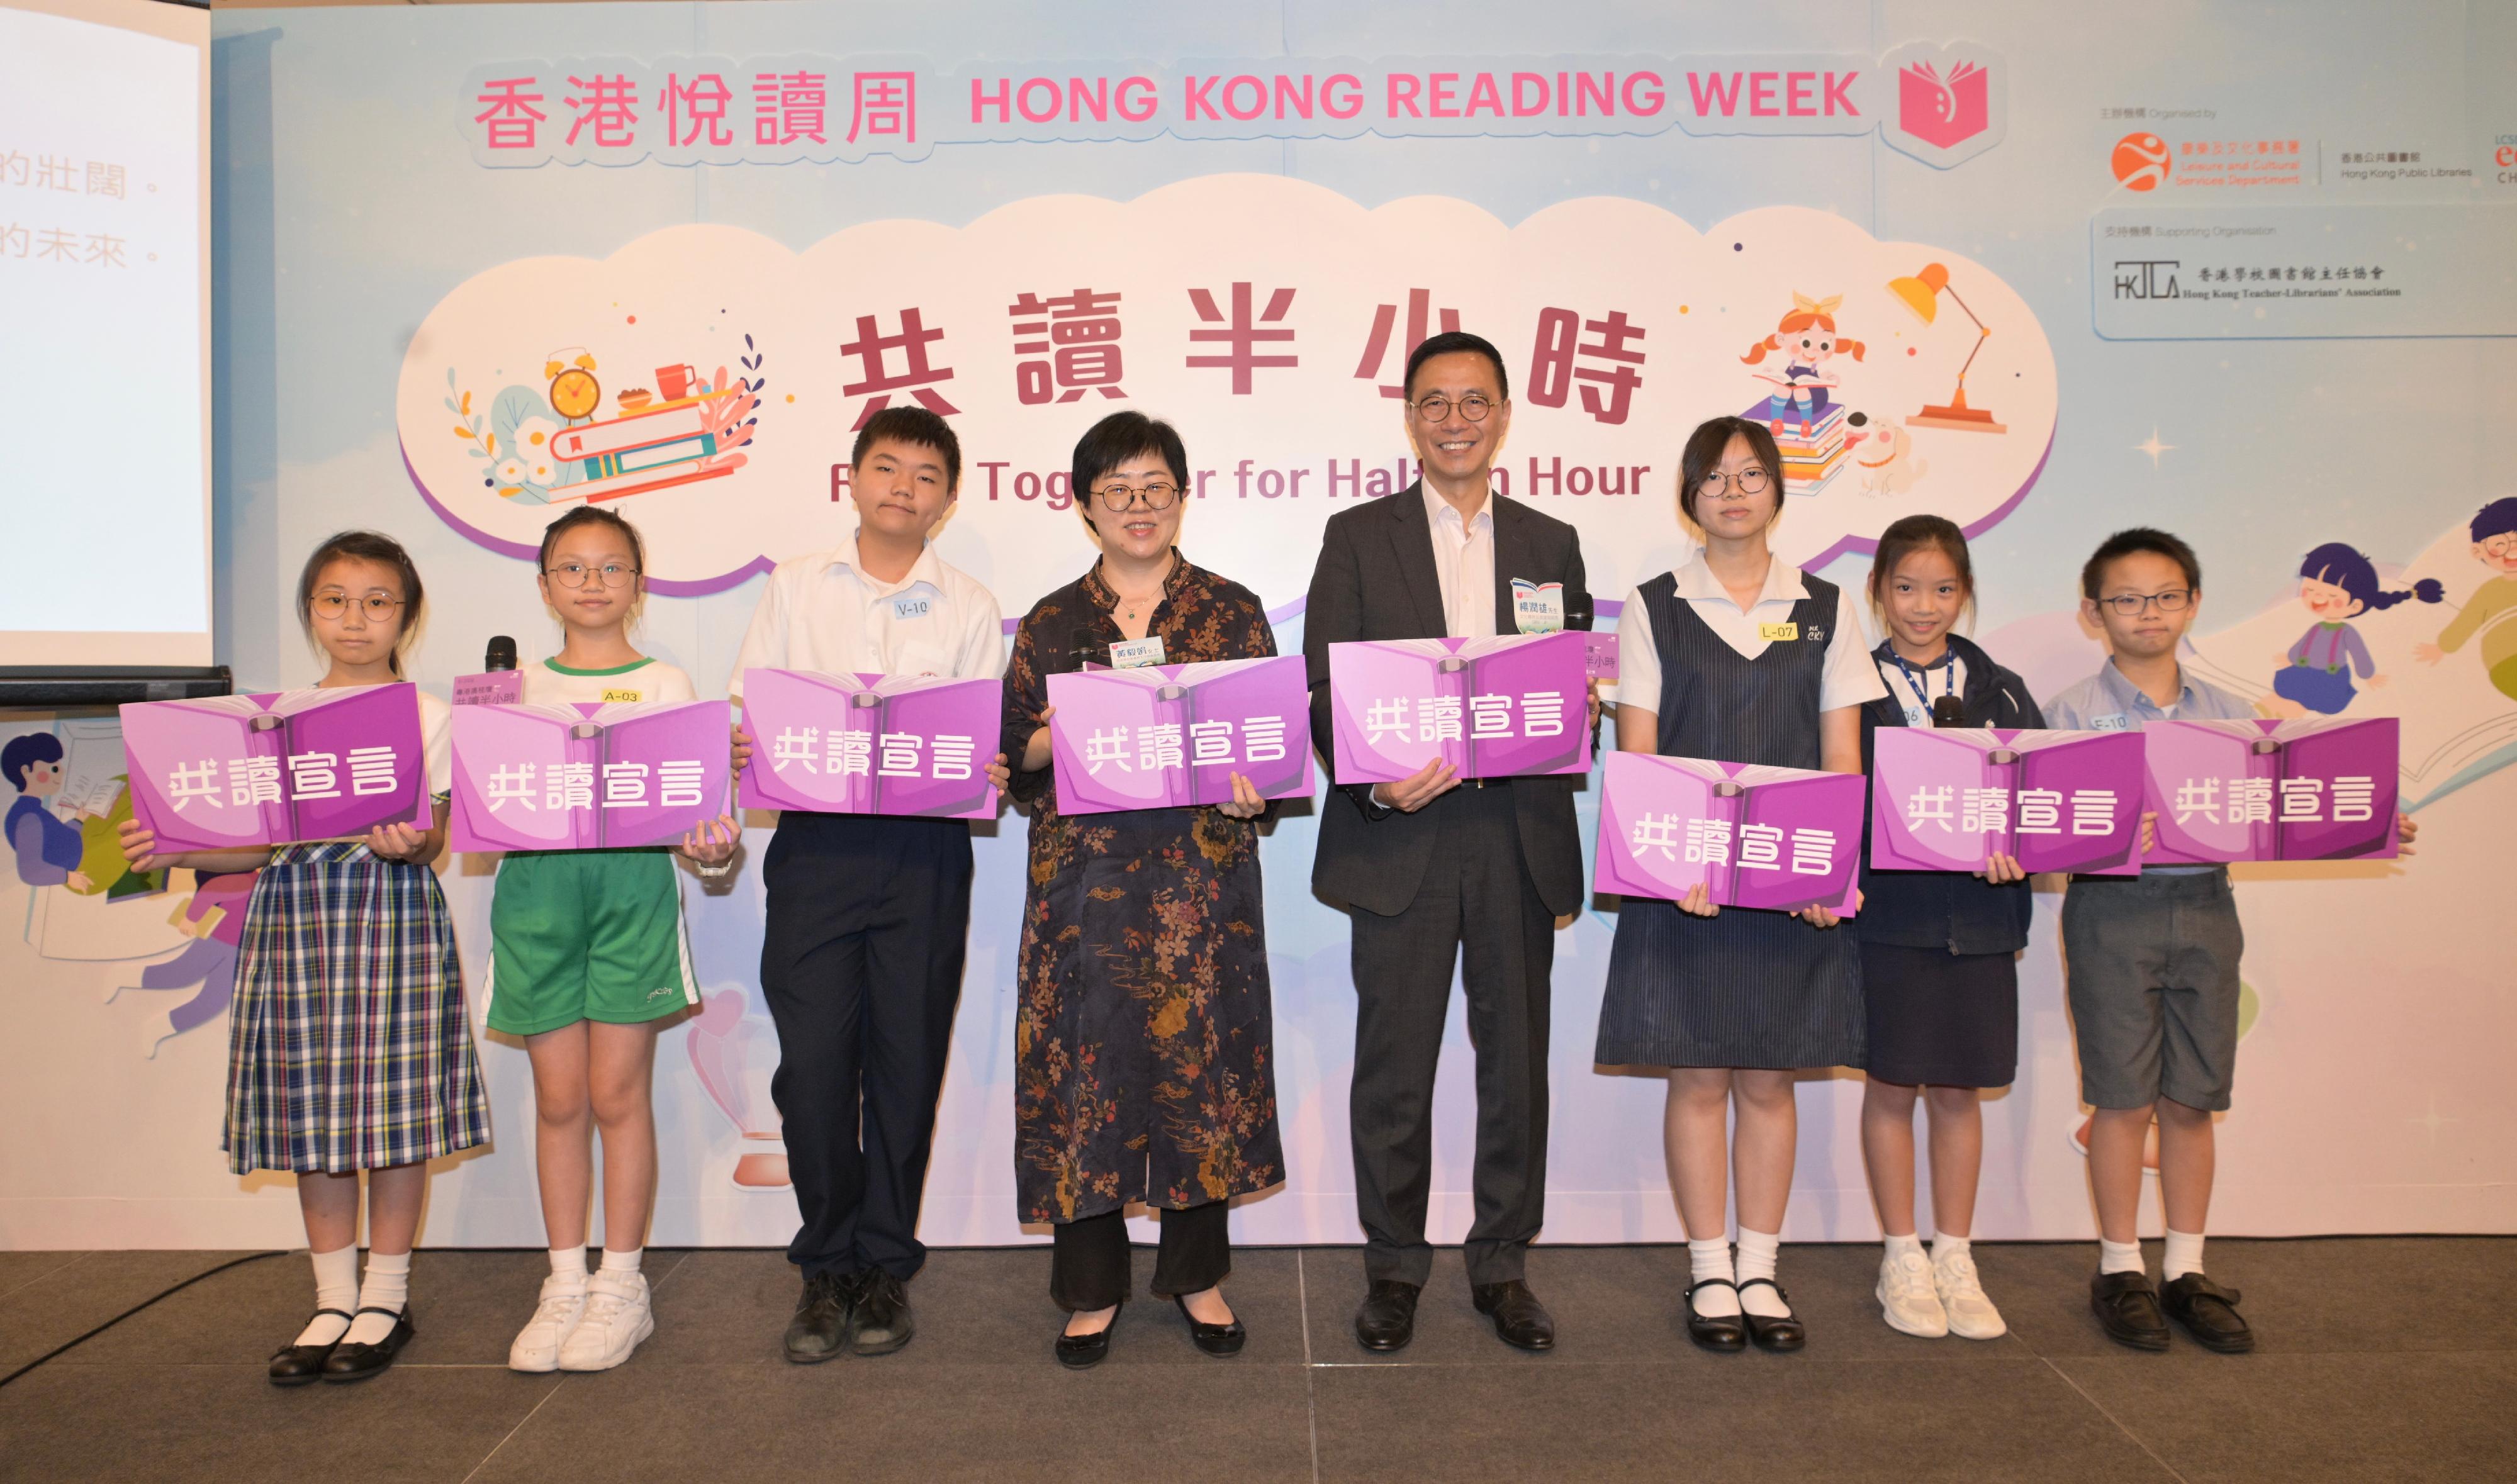 The Hong Kong Public Libraries of the Leisure and Cultural Services Department (LCSD) today (April 23) held "Read Together for Half an Hour" activities at the Hong Kong Central Library (HKCL) and various LCSD venues on the first Hong Kong Reading for All Day. The Secretary for Culture, Sports and Tourism, Mr Kevin Yeung, participated in the "Read Together for Half an Hour" activity at the Exhibition Gallery of the HKCL with students participating in the Hong Kong Inter-school Chinese Reading Contest organised by the Hong Kong Teacher-Librarians' Association (HKTLA). Photo shows Mr Yeung (fourth right), the President of the HKTLA, Ms Wong Ngai-kuen (fourth left), and students after reading together the Reading Manifesto.